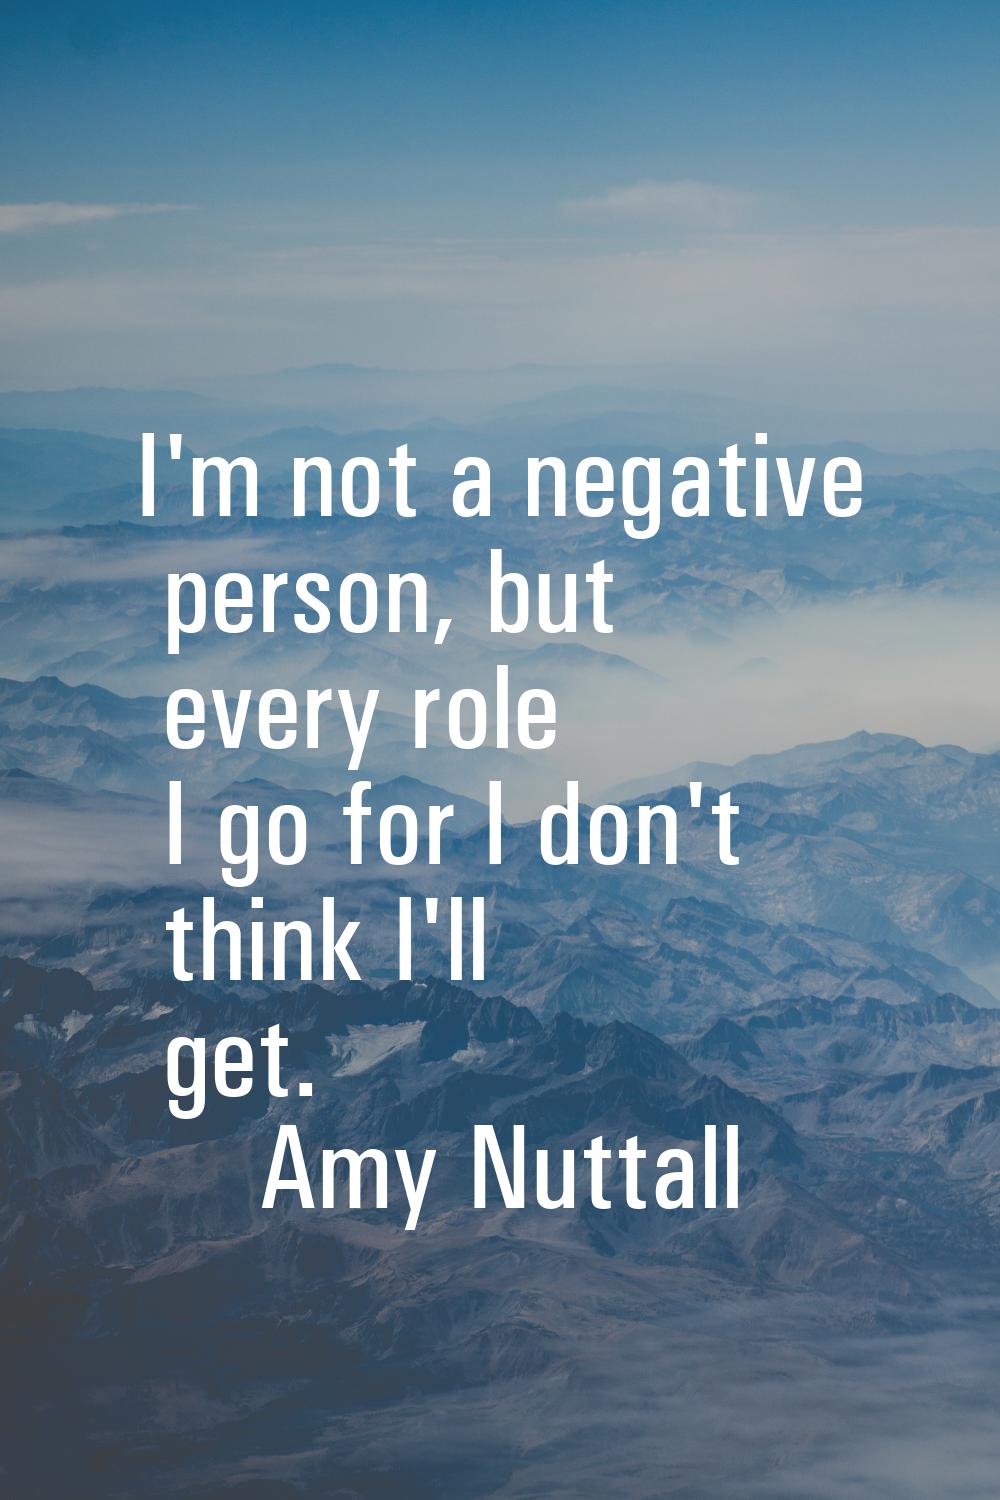 I'm not a negative person, but every role I go for I don't think I'll get.